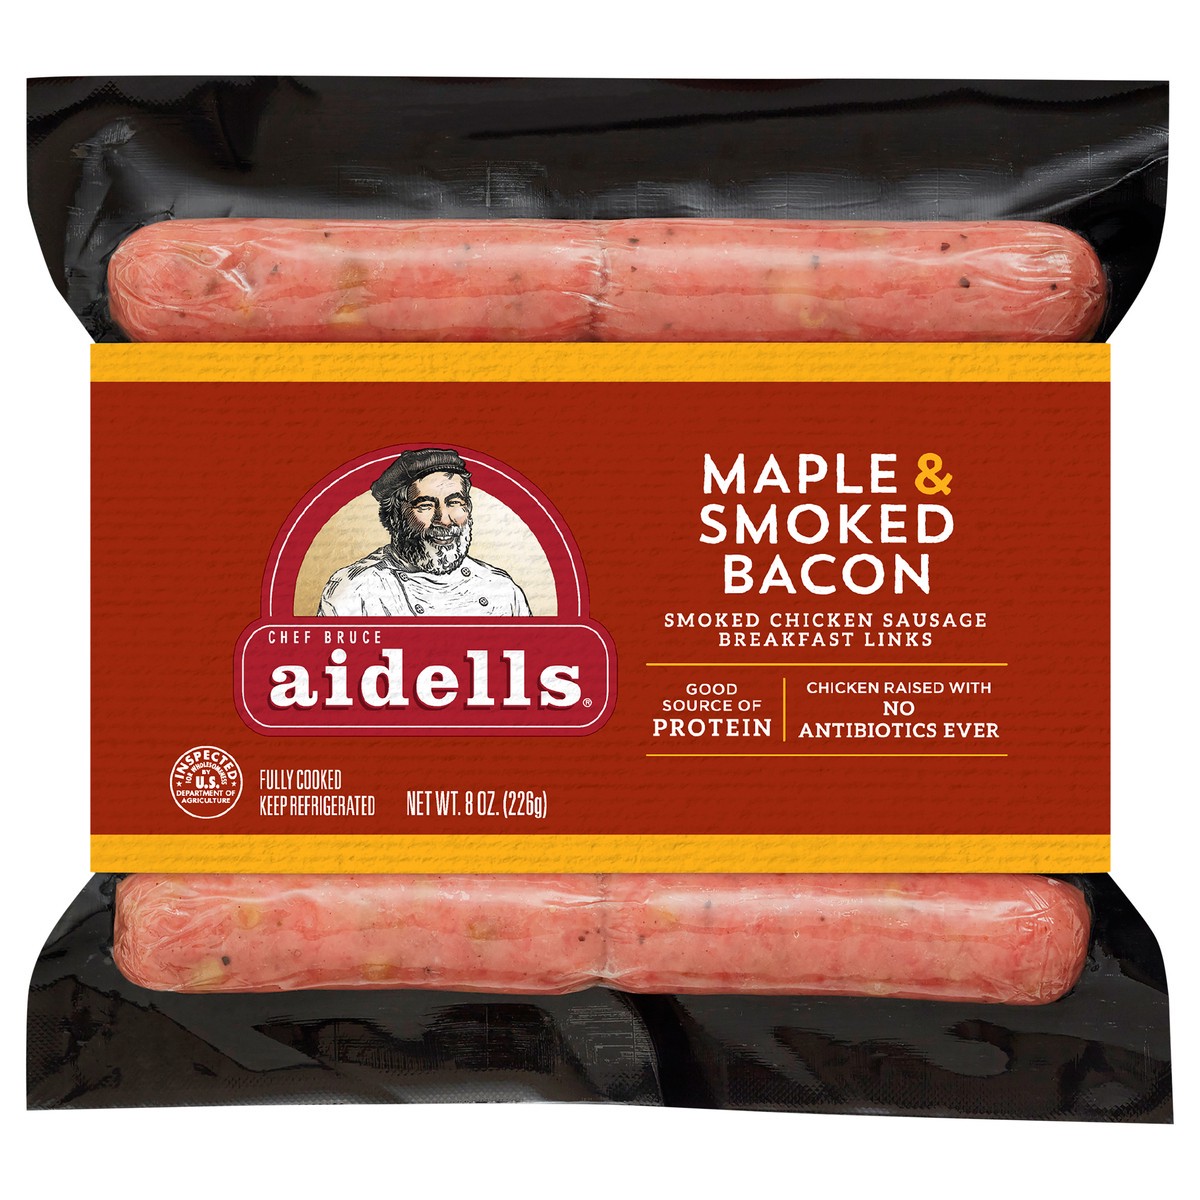 slide 4 of 6, Aidells Smoked Chicken Sausage Breakfast Links, Maple & Smoked Bacon, 8 oz. (10 Fully Cooked Links), 10 ct; 8 oz